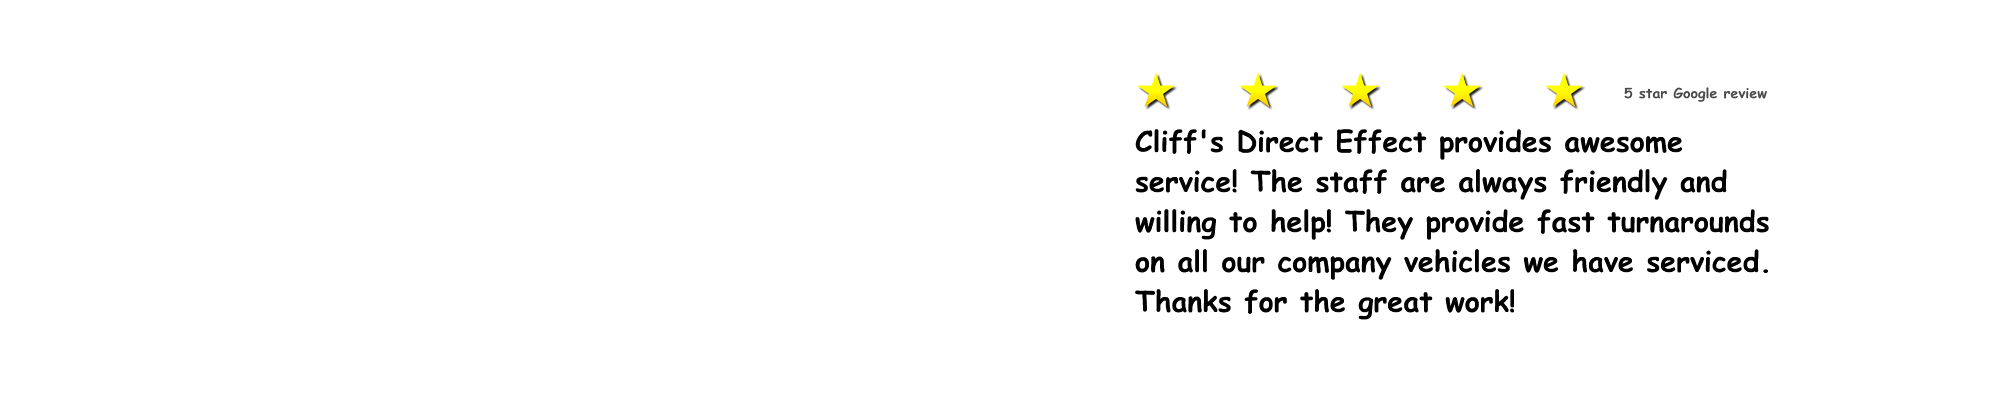 Cliff's Direct Effect - 5-star Google review